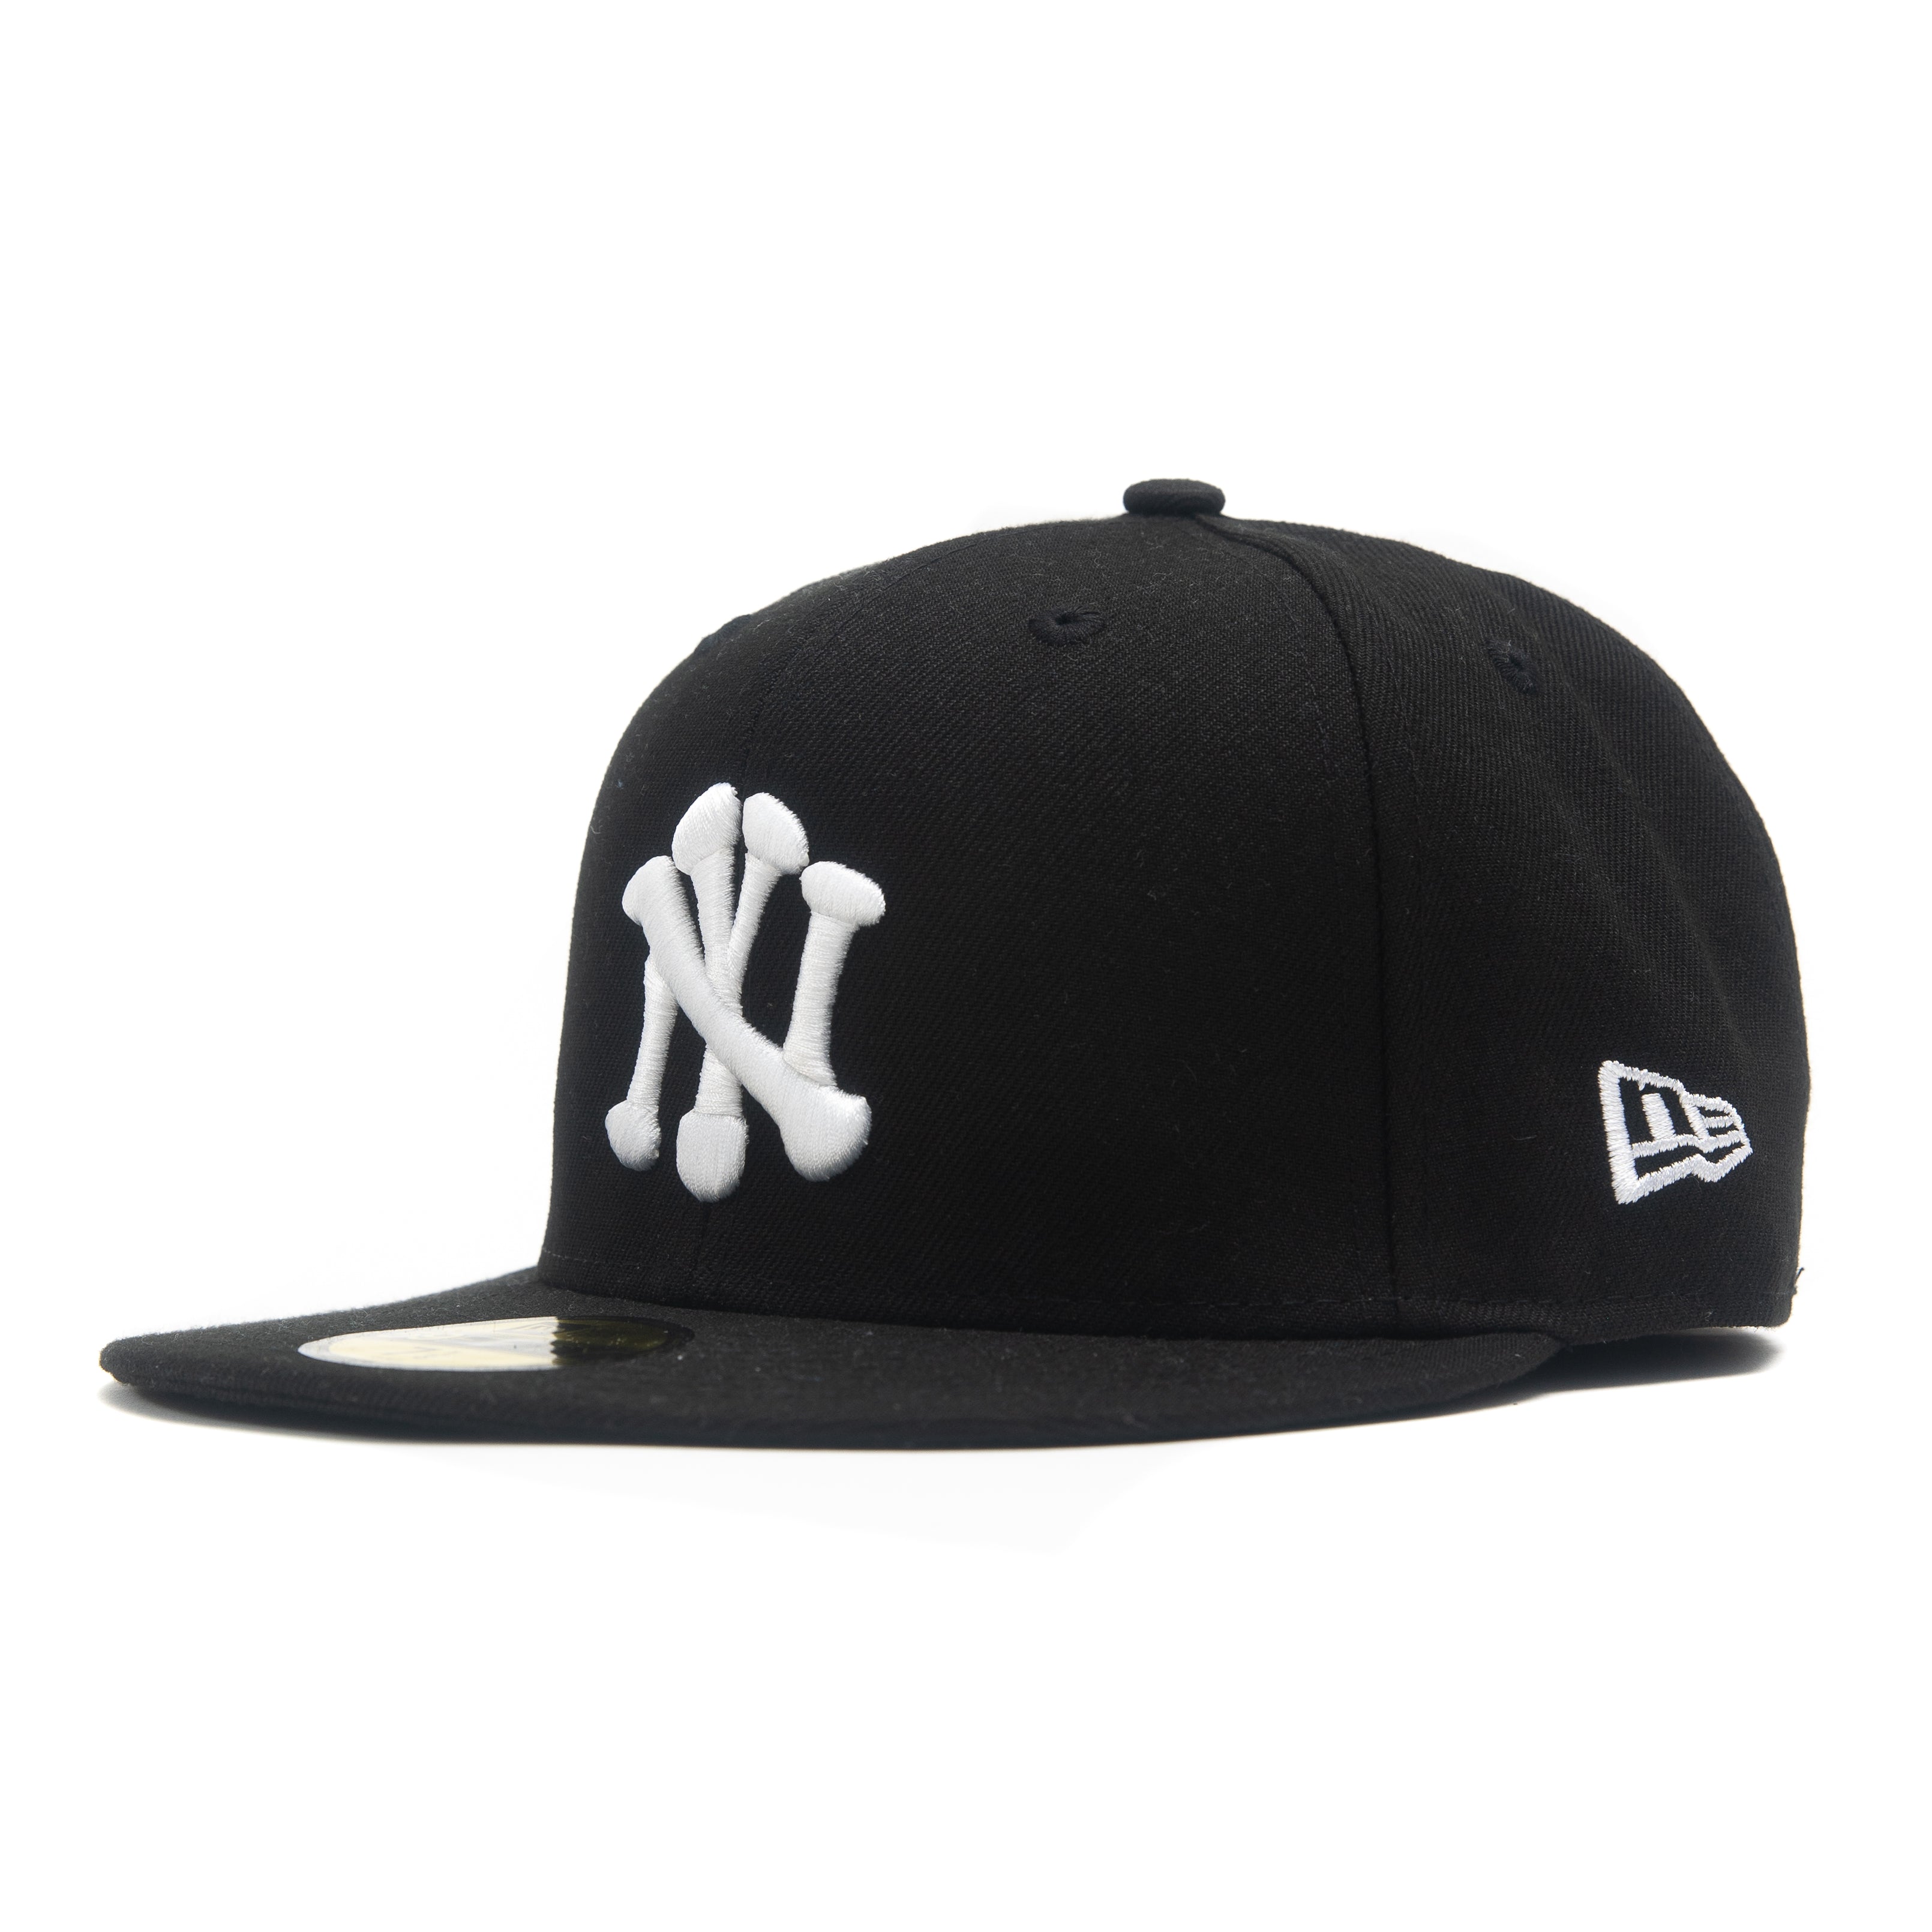 NEW YORK FITTED - BLACK